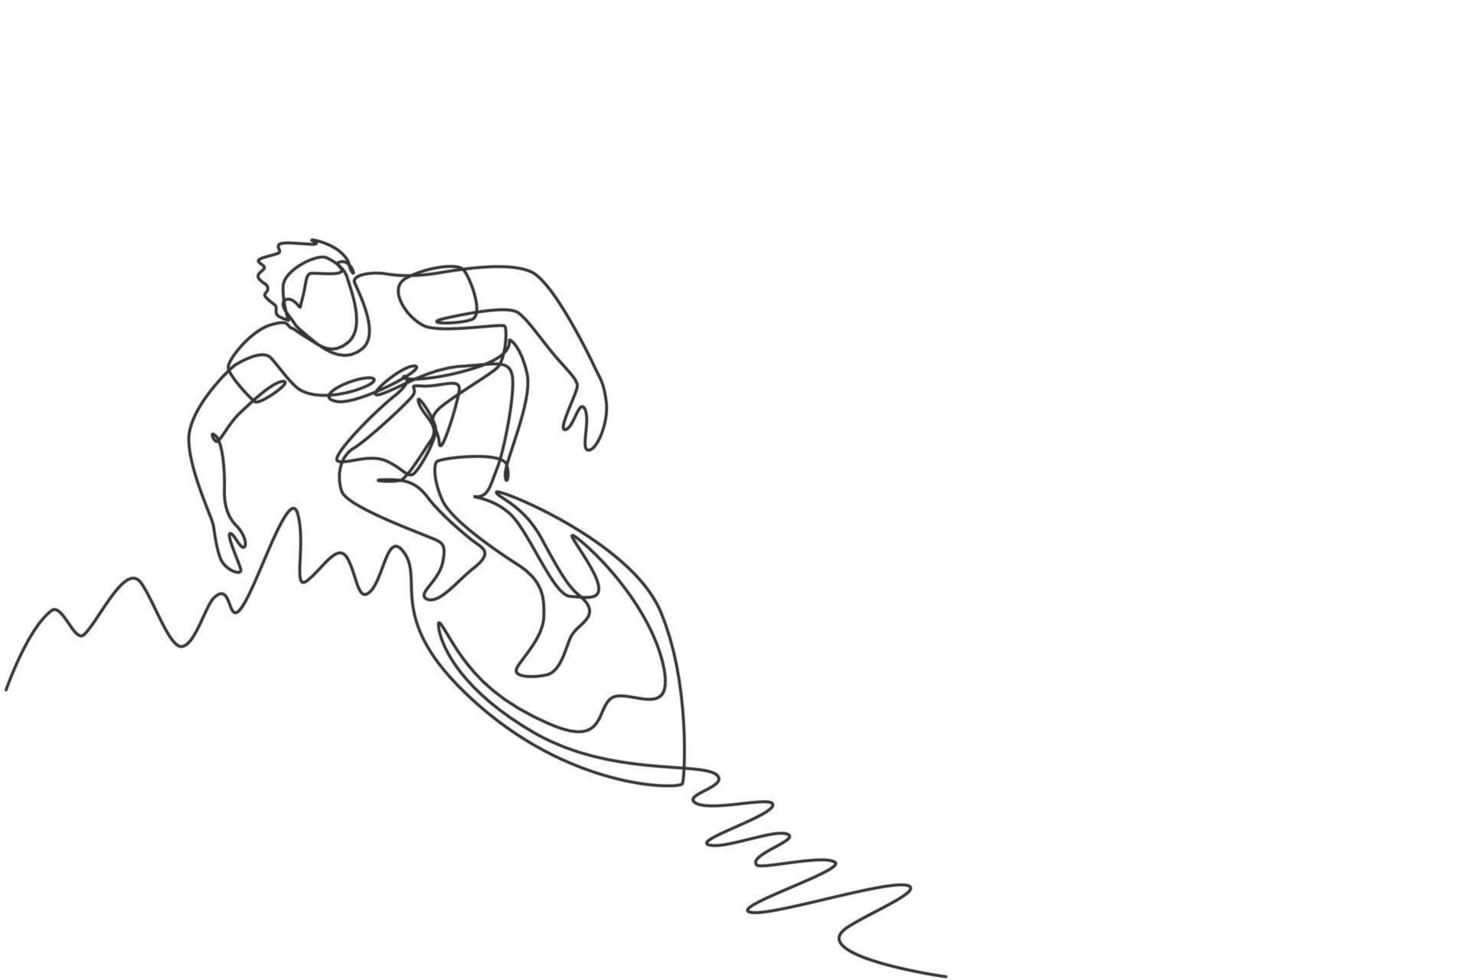 One single line drawing of young sporty surfer man riding on big waves barrel in surfing beach paradise vector illustration. Extreme water sport lifestyle concept. Modern continuous line draw design